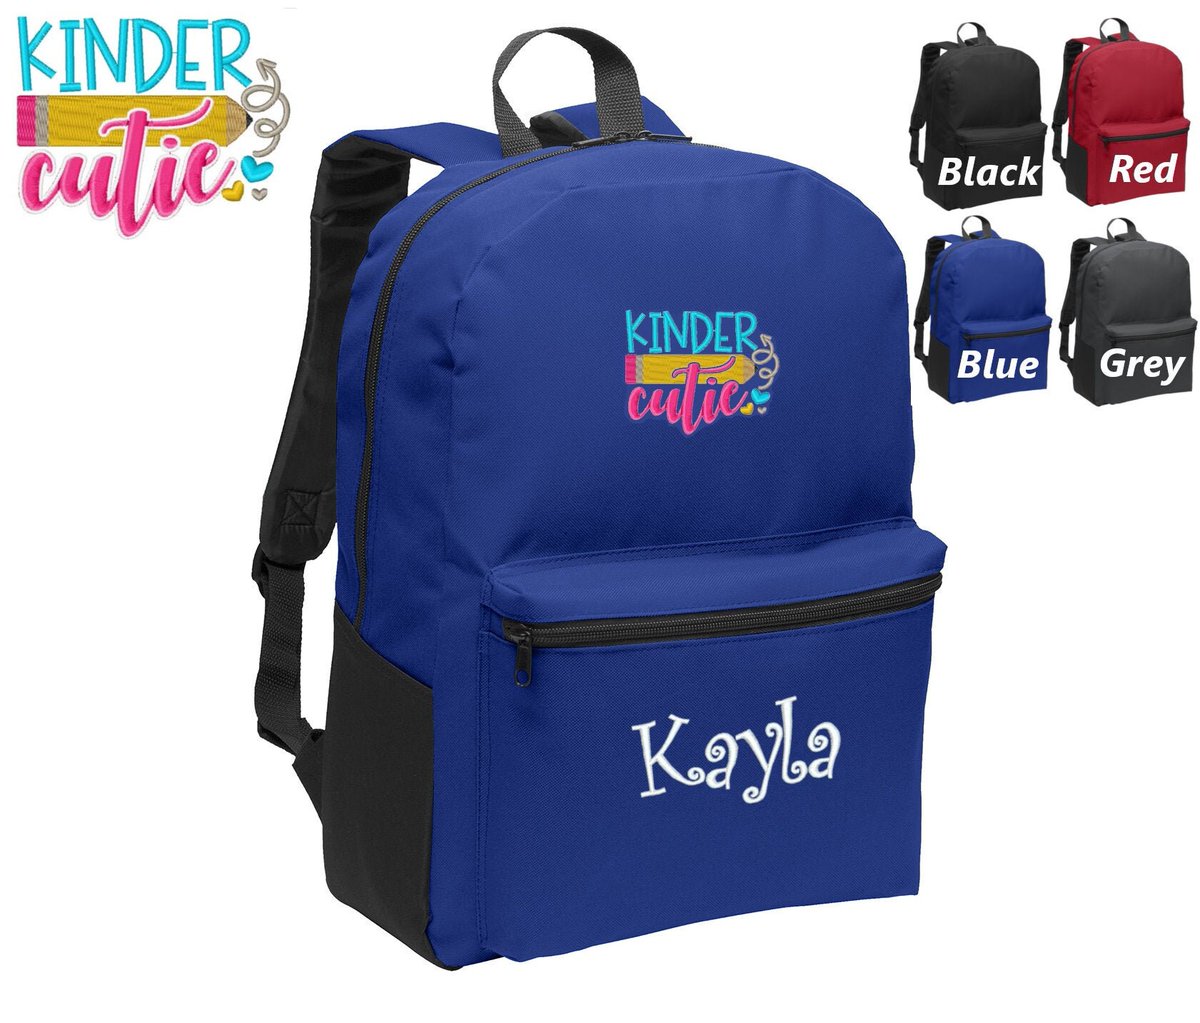 Personalized Kids Kindergarten Backpack Embroidered Cutie Design, Funny Backpack, Monogrammed Name, Perfect Kids School Sports Gift etsy.com/listing/789171…
 #BoysGift #GirlsGift